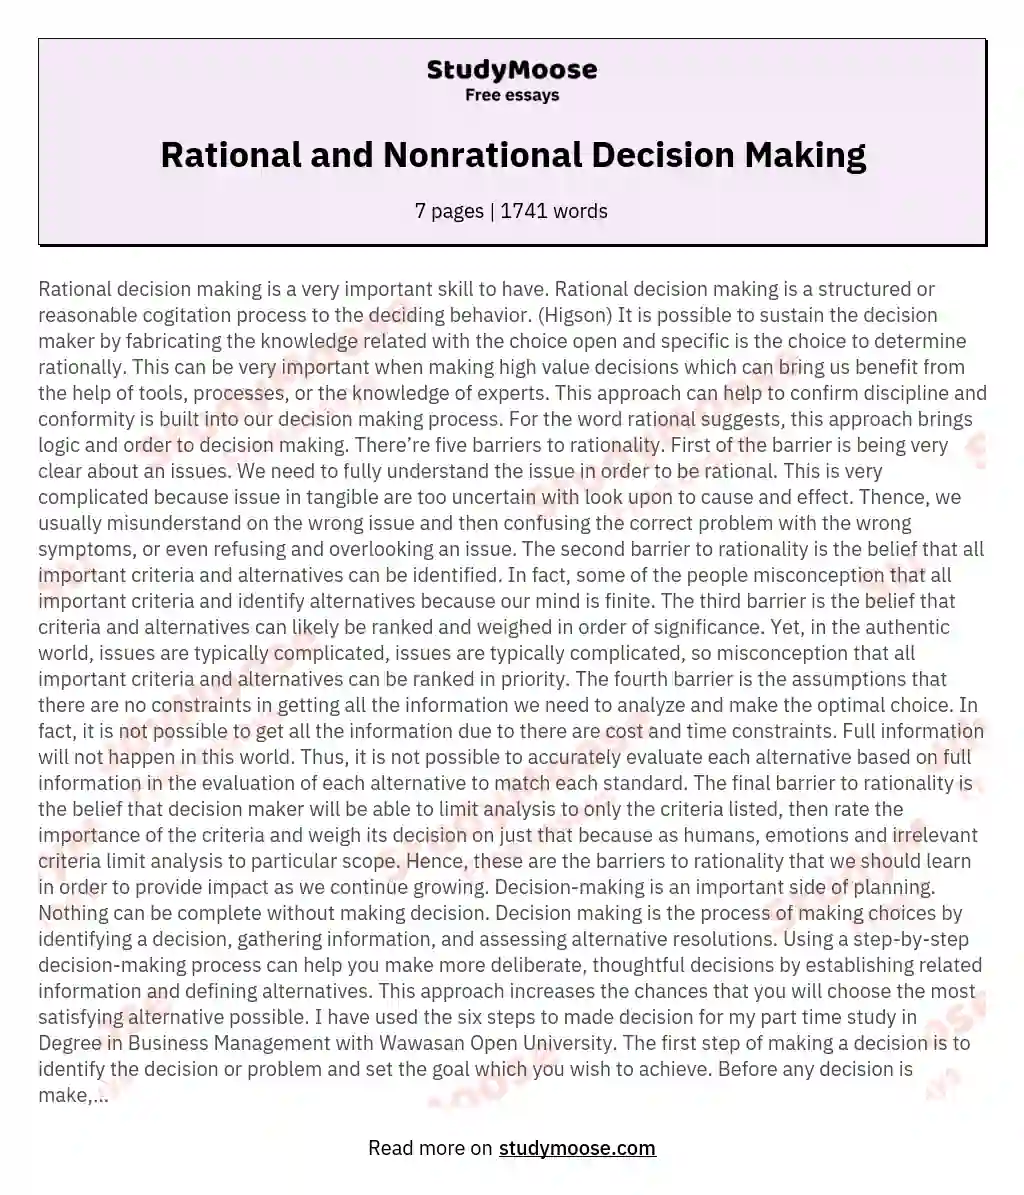 Rational and Nonrational Decision Making essay